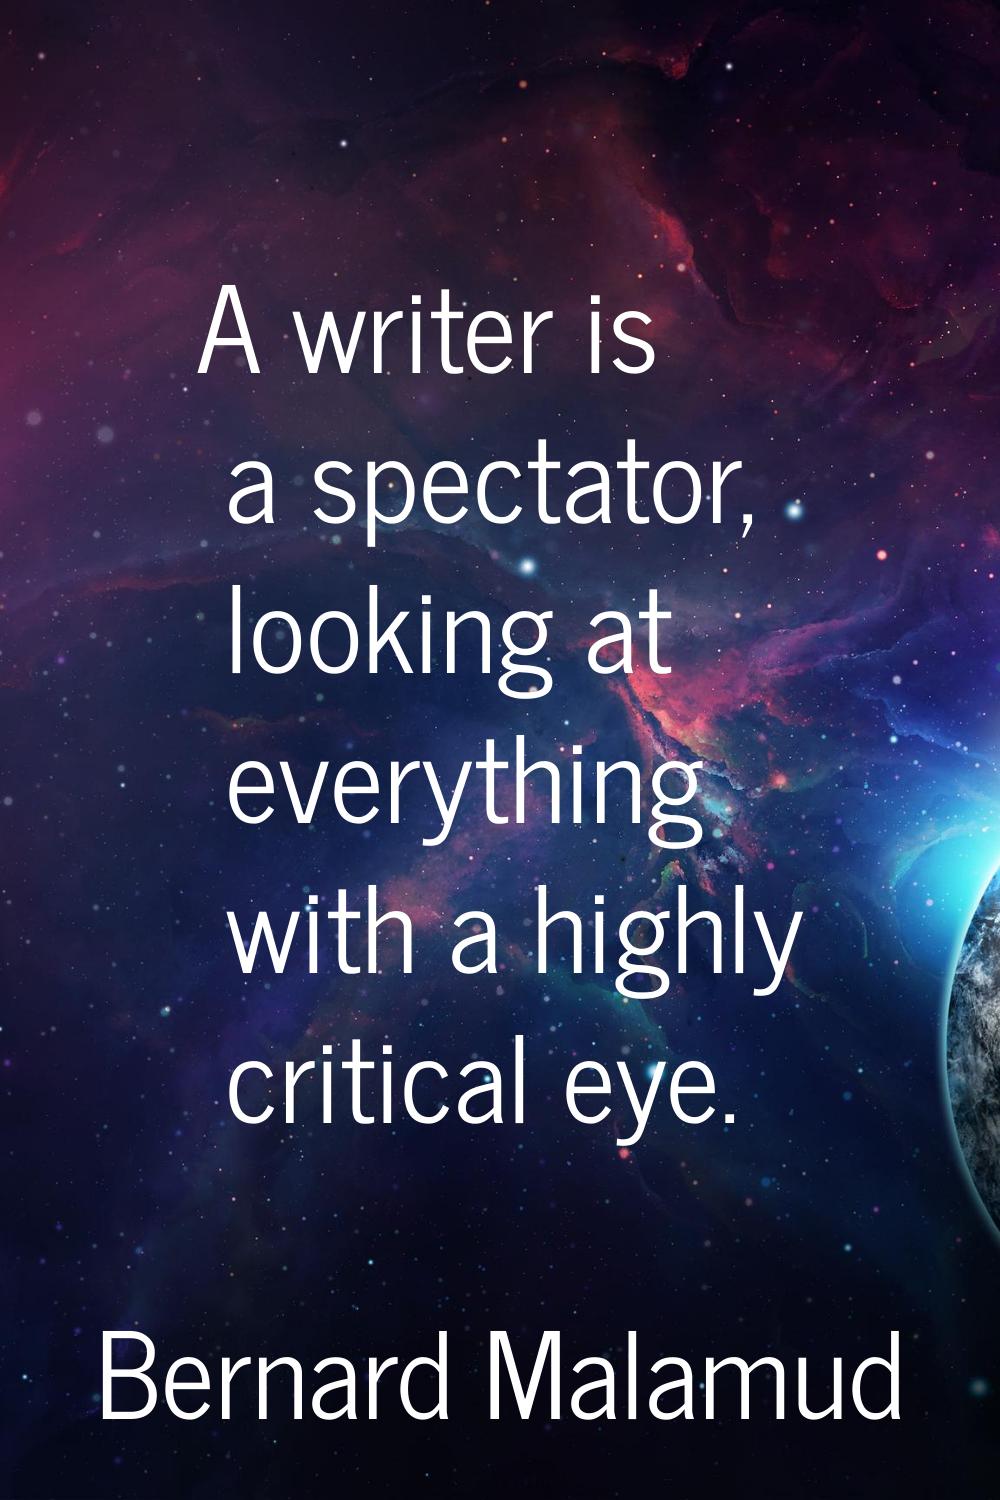 A writer is a spectator, looking at everything with a highly critical eye.